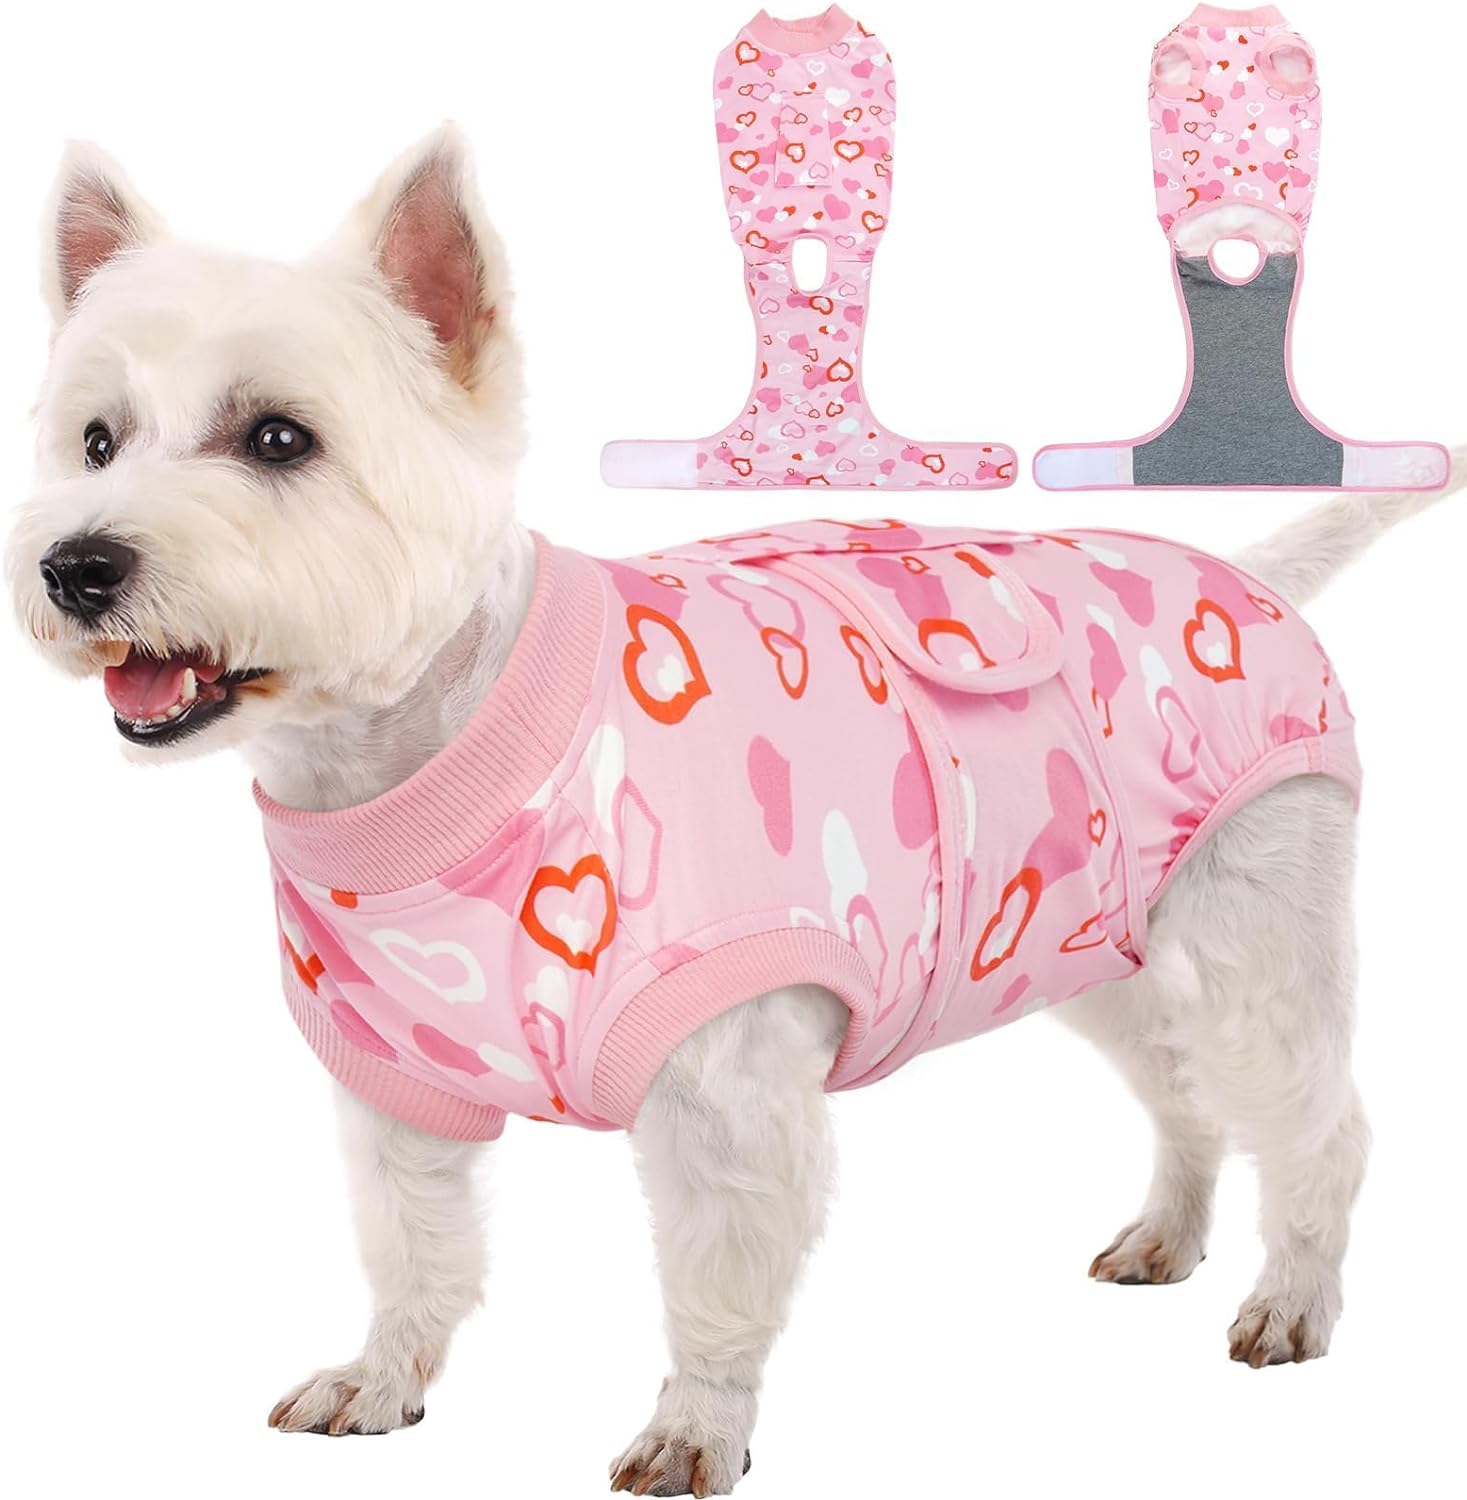 Kuoser Recovery Suit for Dogs After Surgery, Valentine's Day Dog Surgical Recovery Suit for Female Male Dogs, Dog Onesies for Small Dogs, Pet Surgical Suit for Spay Neuter Dog Cone Alternative